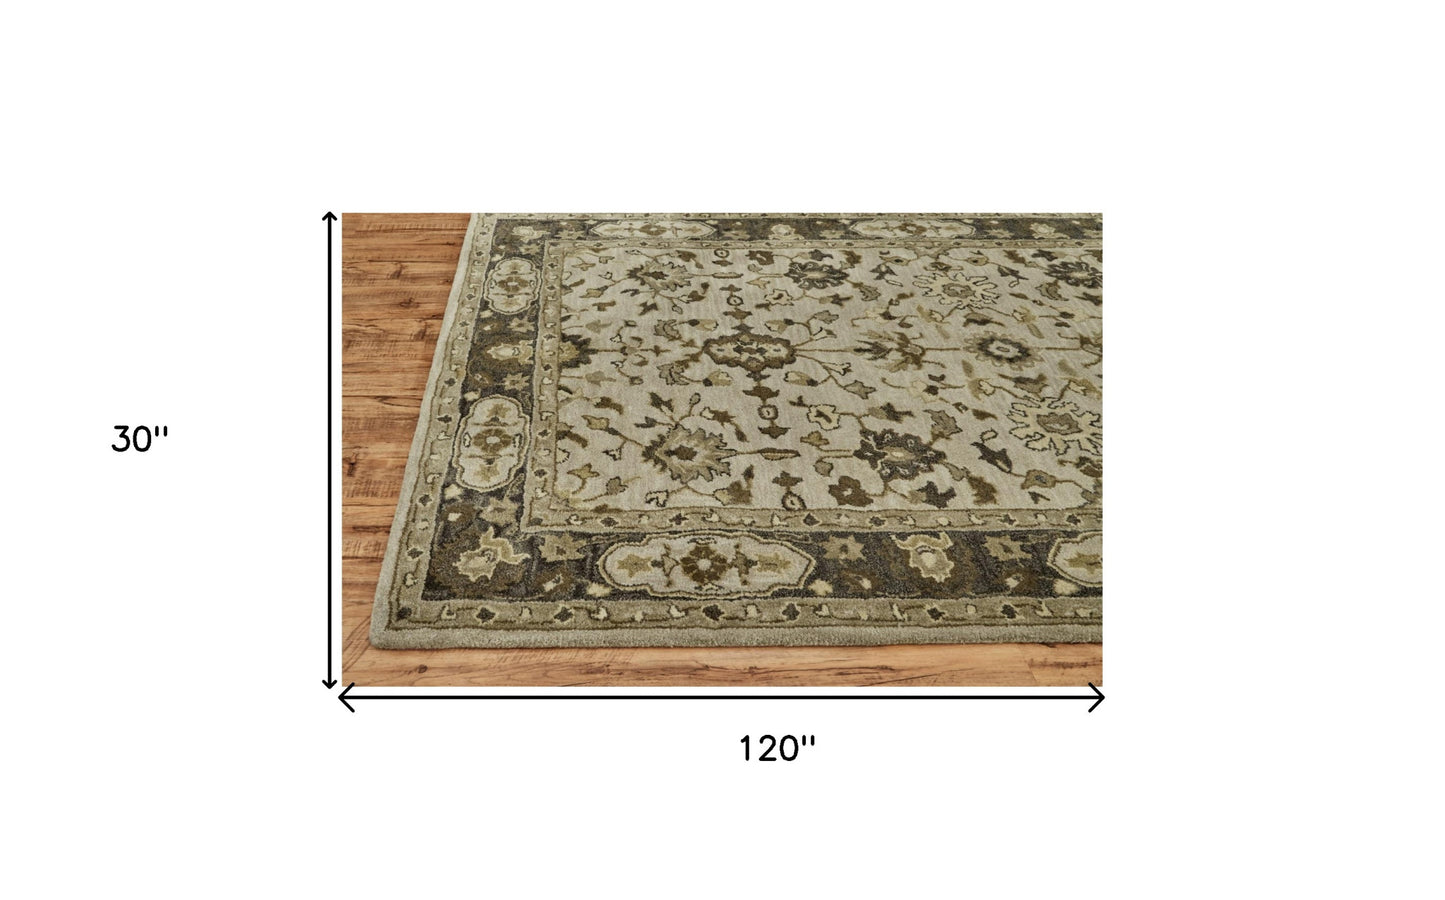 4' X 6' Gray Ivory And Taupe Wool Floral Tufted Handmade Stain Resistant Area Rug